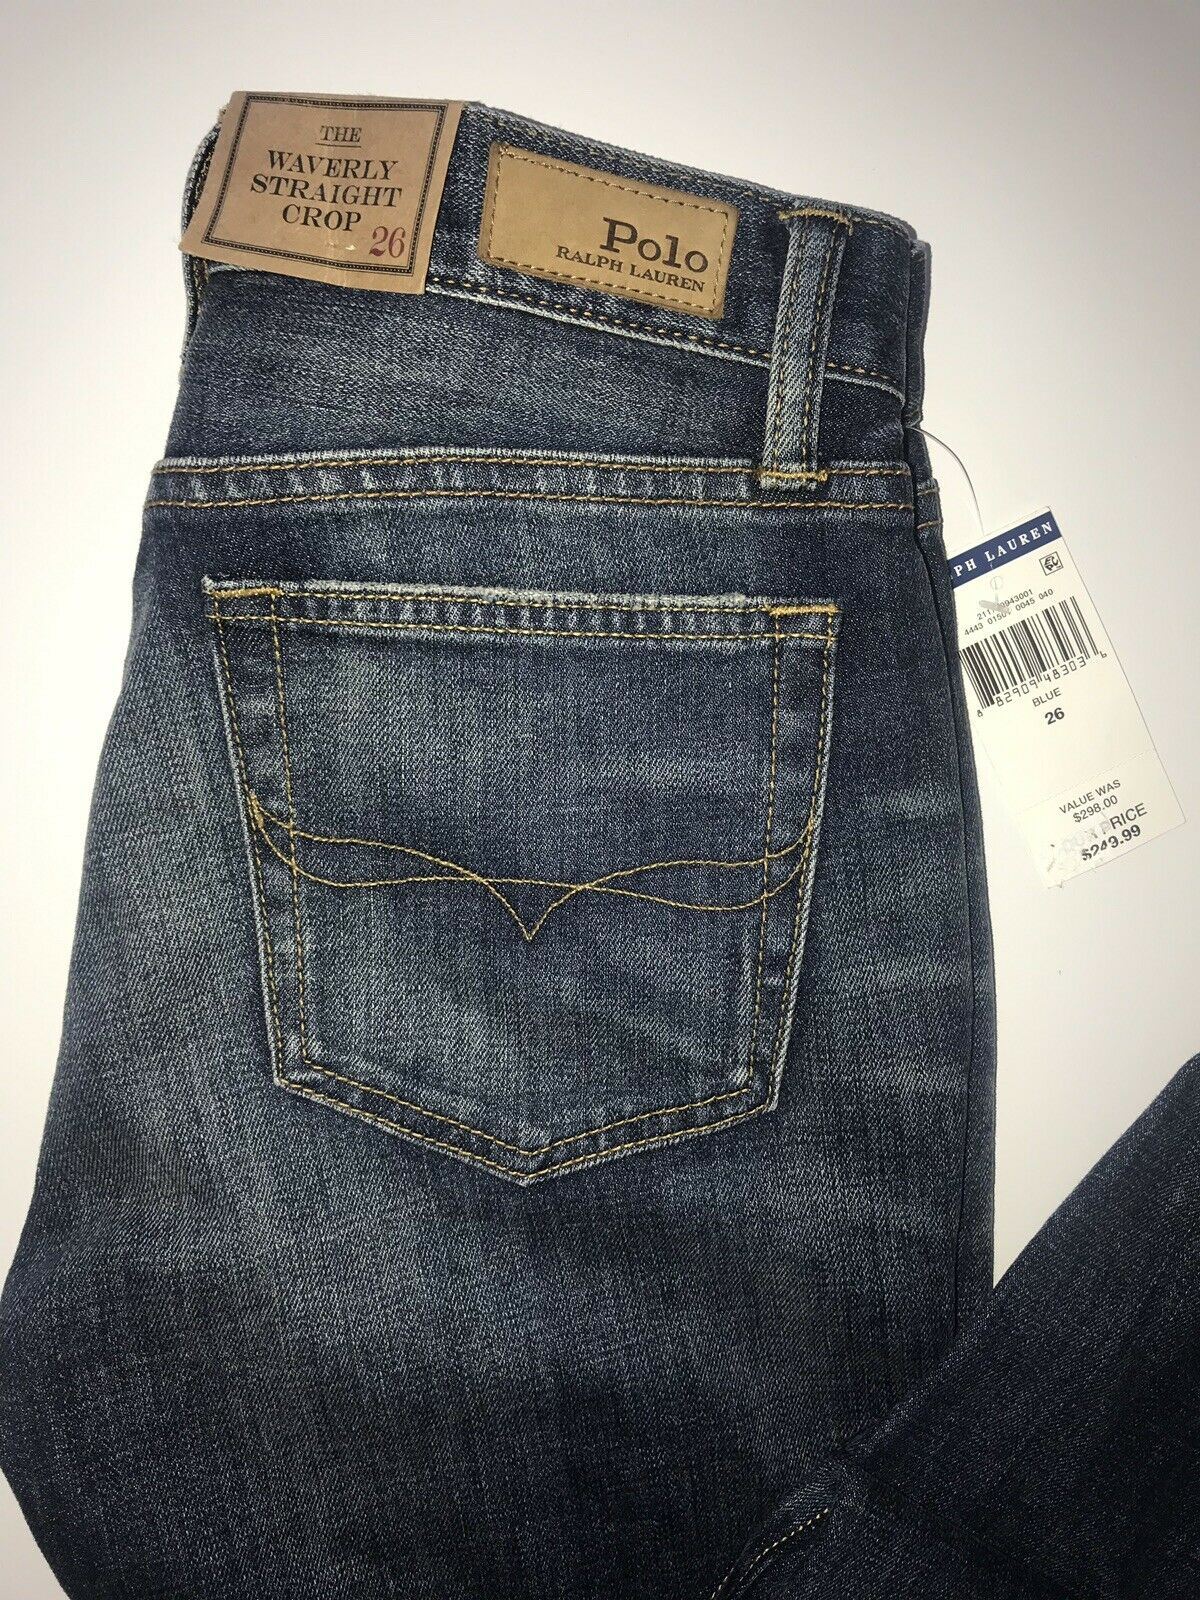 NWT $298 Polo Ralph Lauren Waverly Straight Crop Embroidered Blue Jeans Size 26